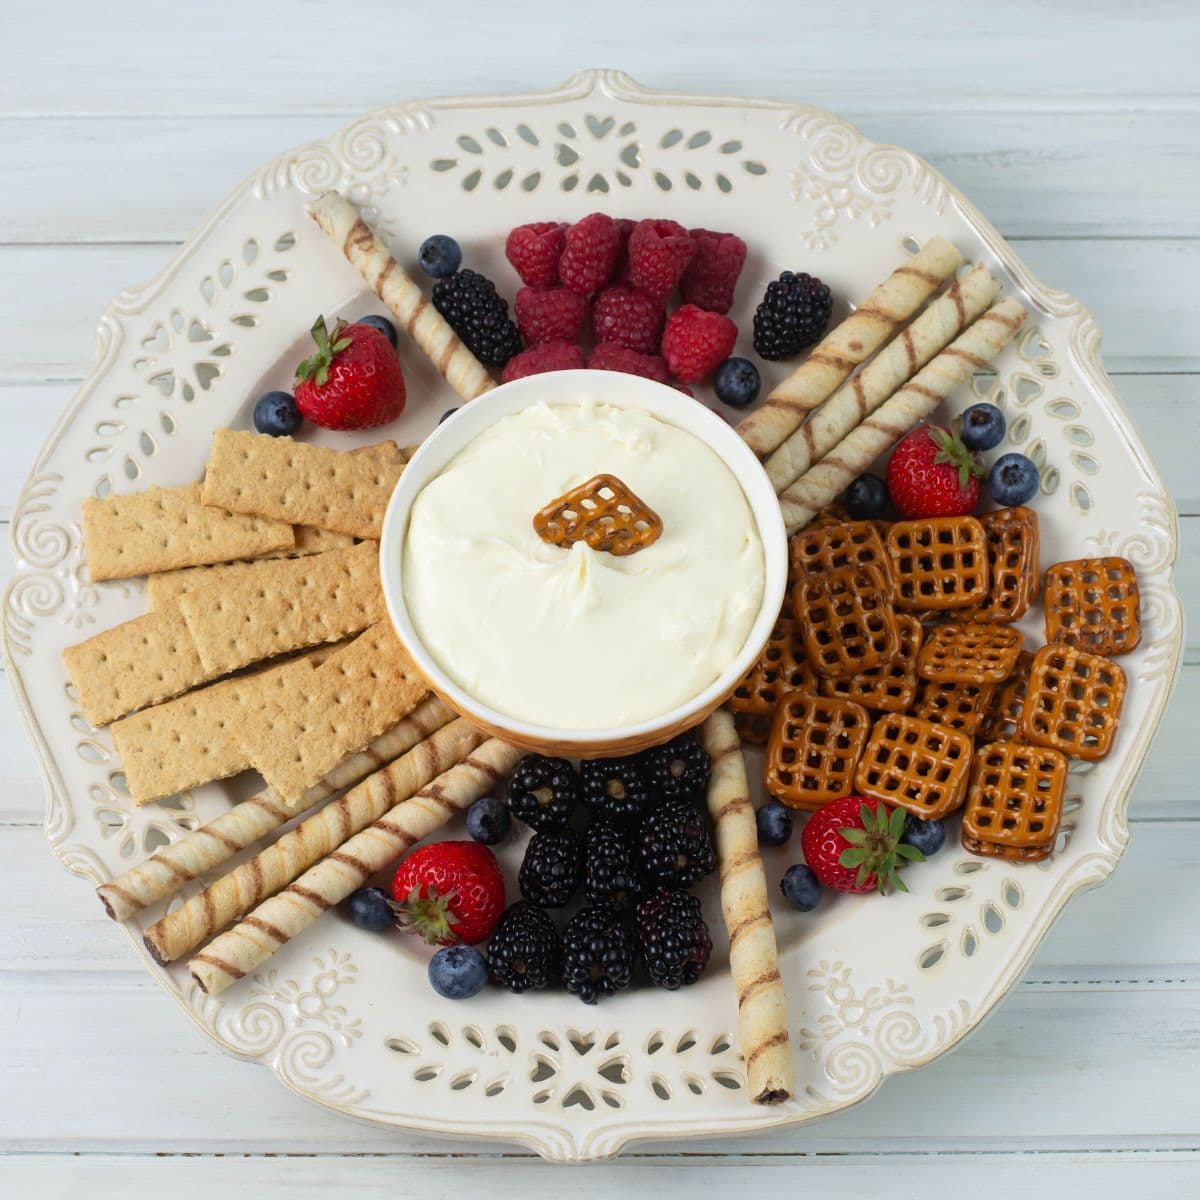 A large platter with a bowl of cheesecake dip in the center surrounded by fruits, cookies and pretzels.